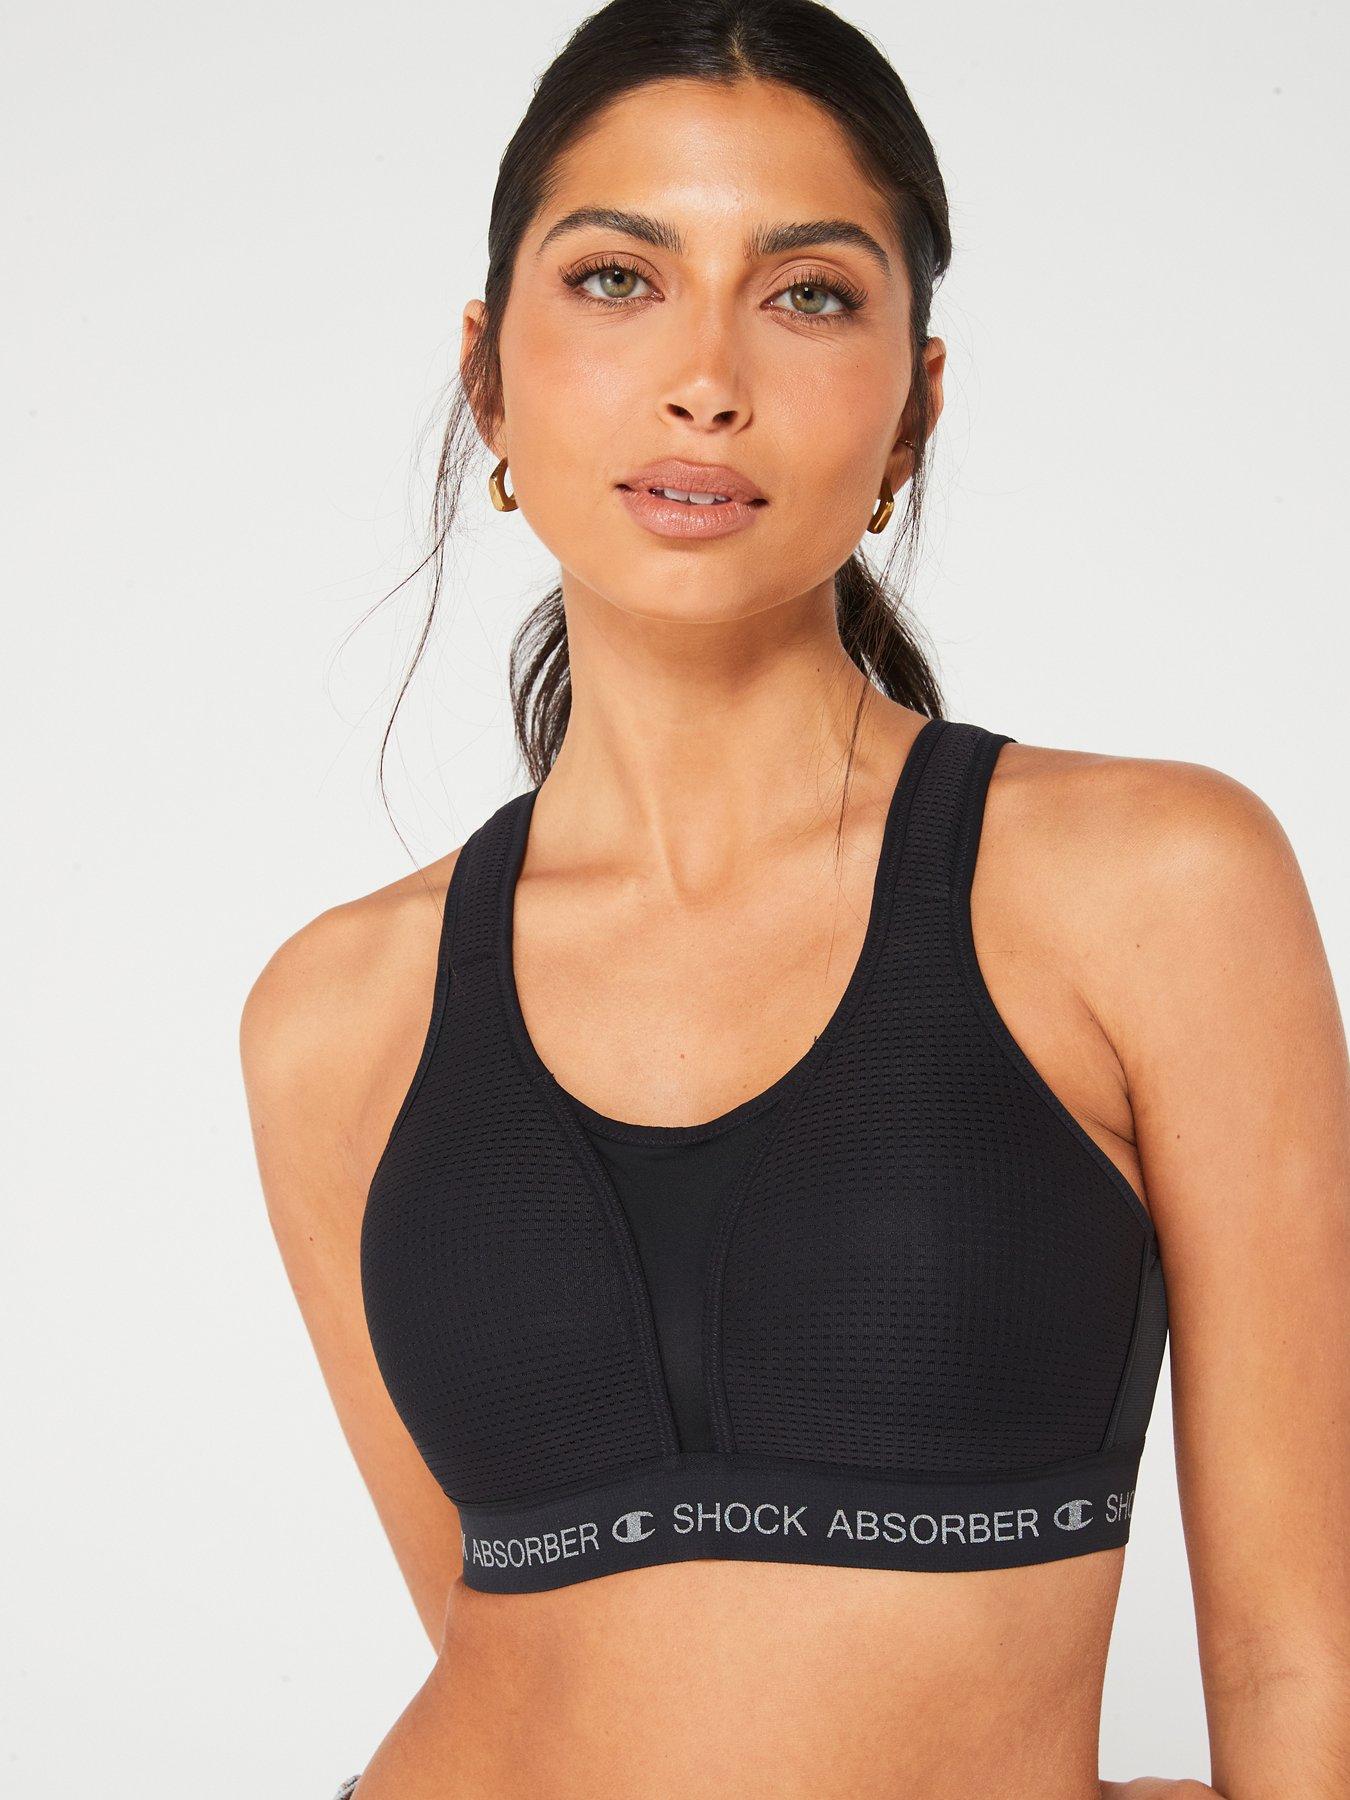 Shock Absorber D+ Classic Support Bra Review - Sports Bras Direct